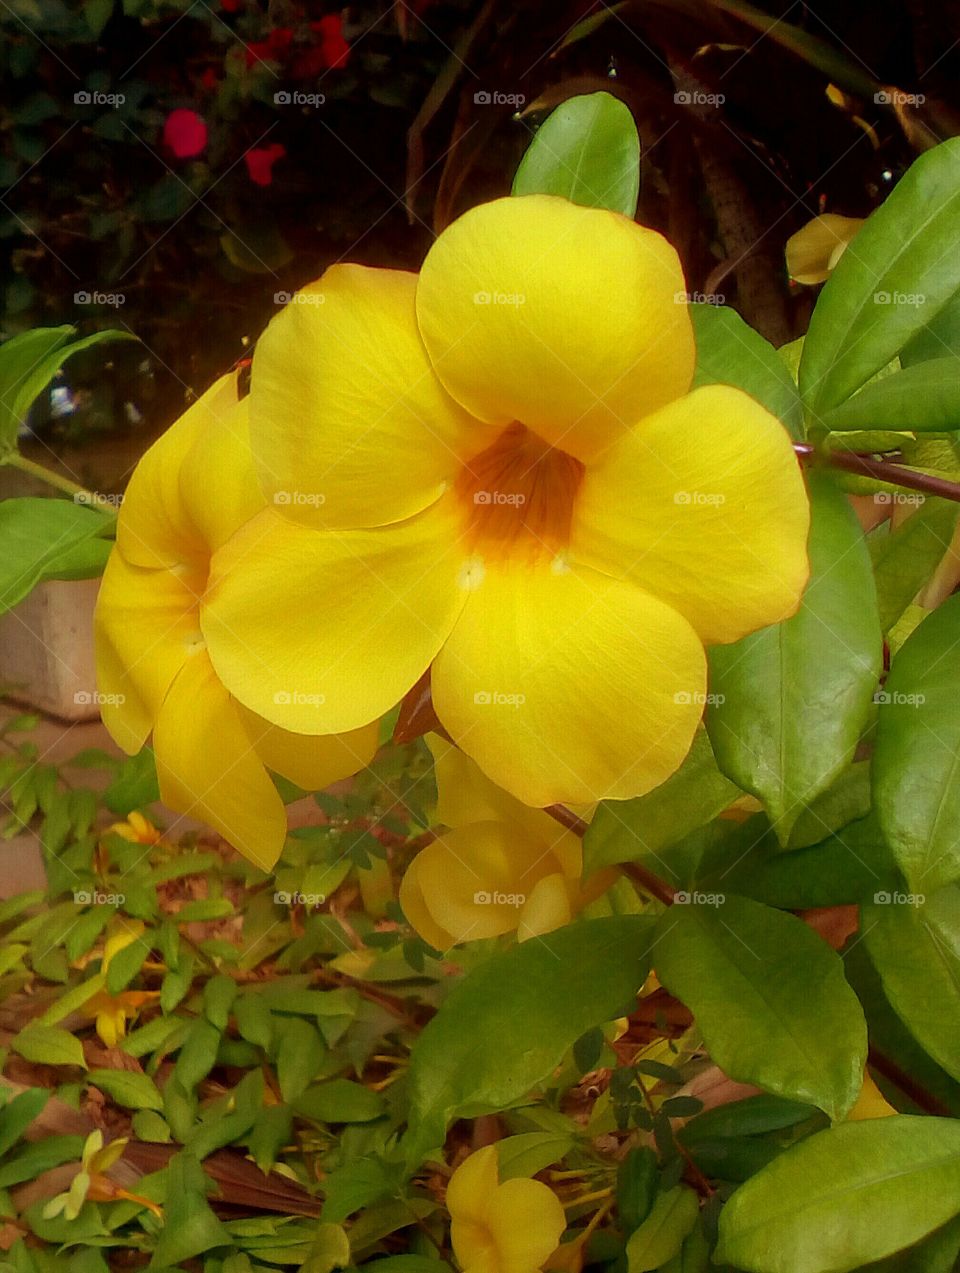 Gorgeous yellow golden tropical exotic
flower with five large petals hanging 
on branch with many green bright leaves
in wild garden in sunny day of fall season